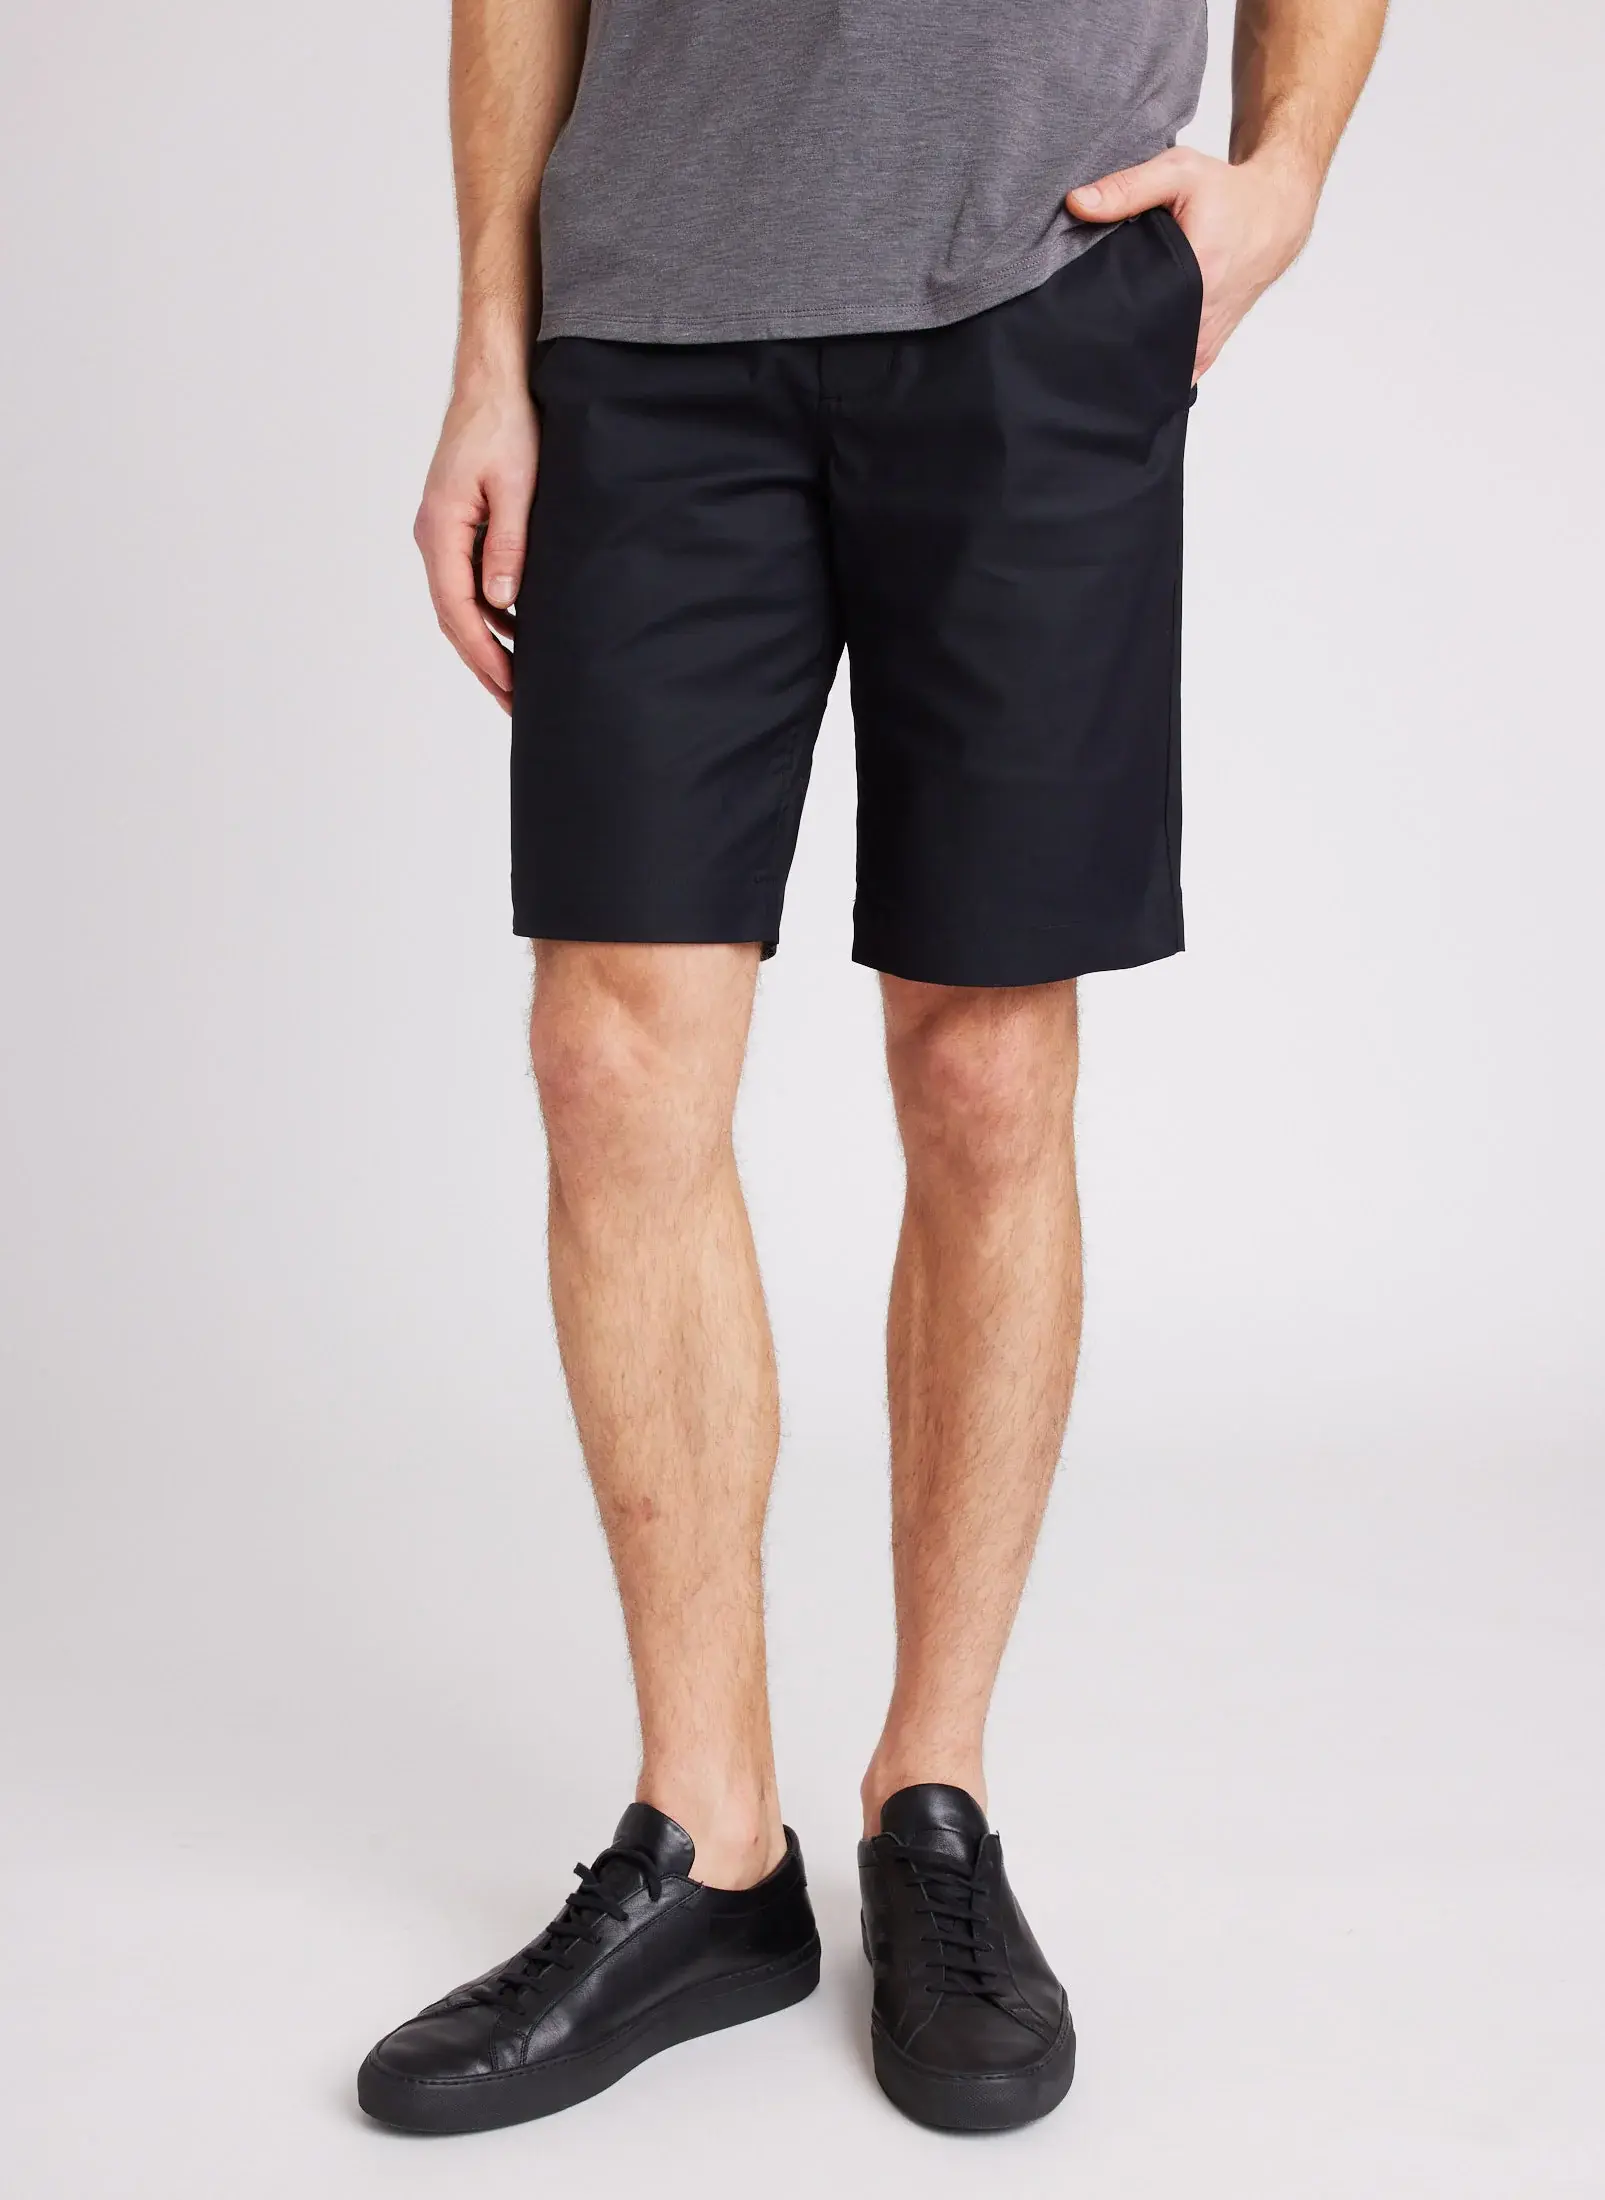 Kit And Ace Navigator Essential Shorts 10". 1